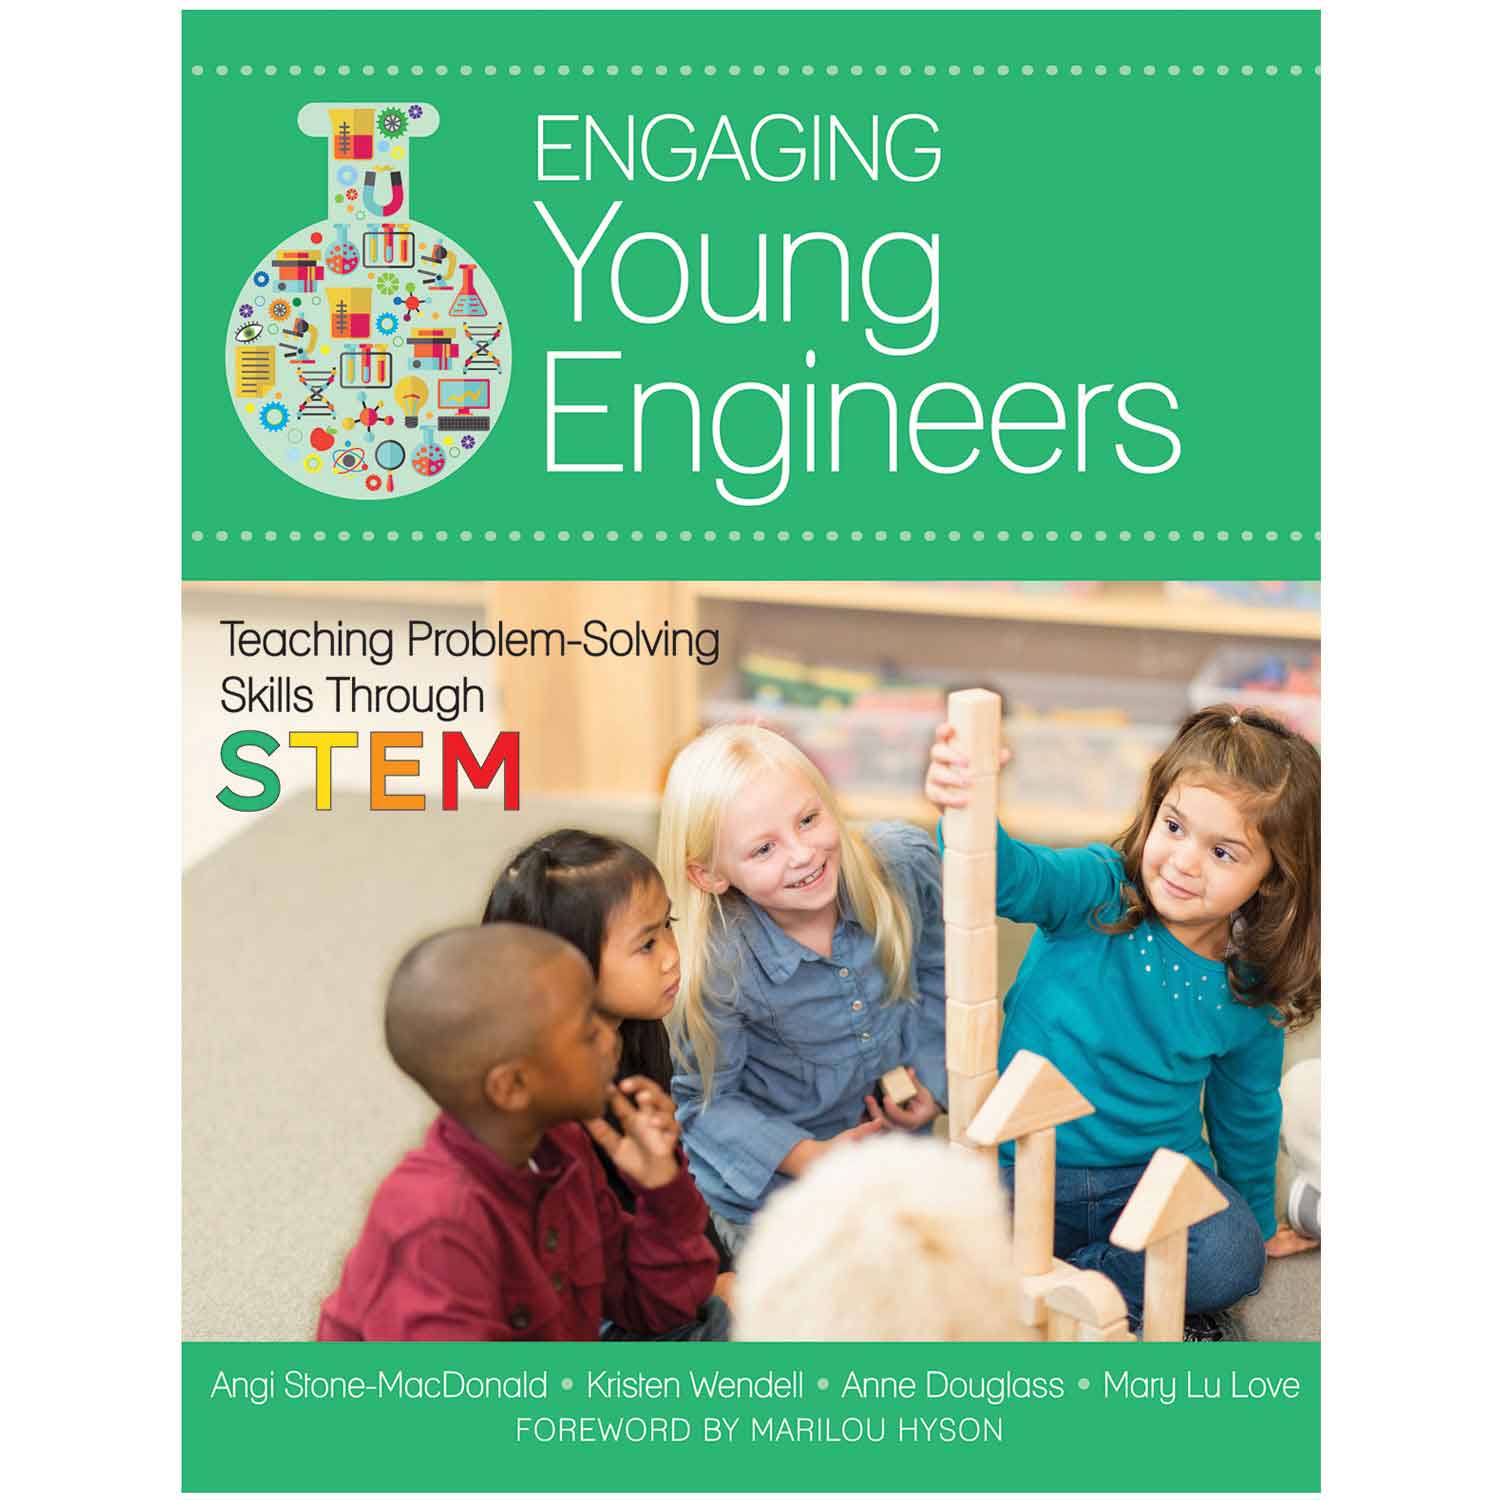 Engaging Young Engineers